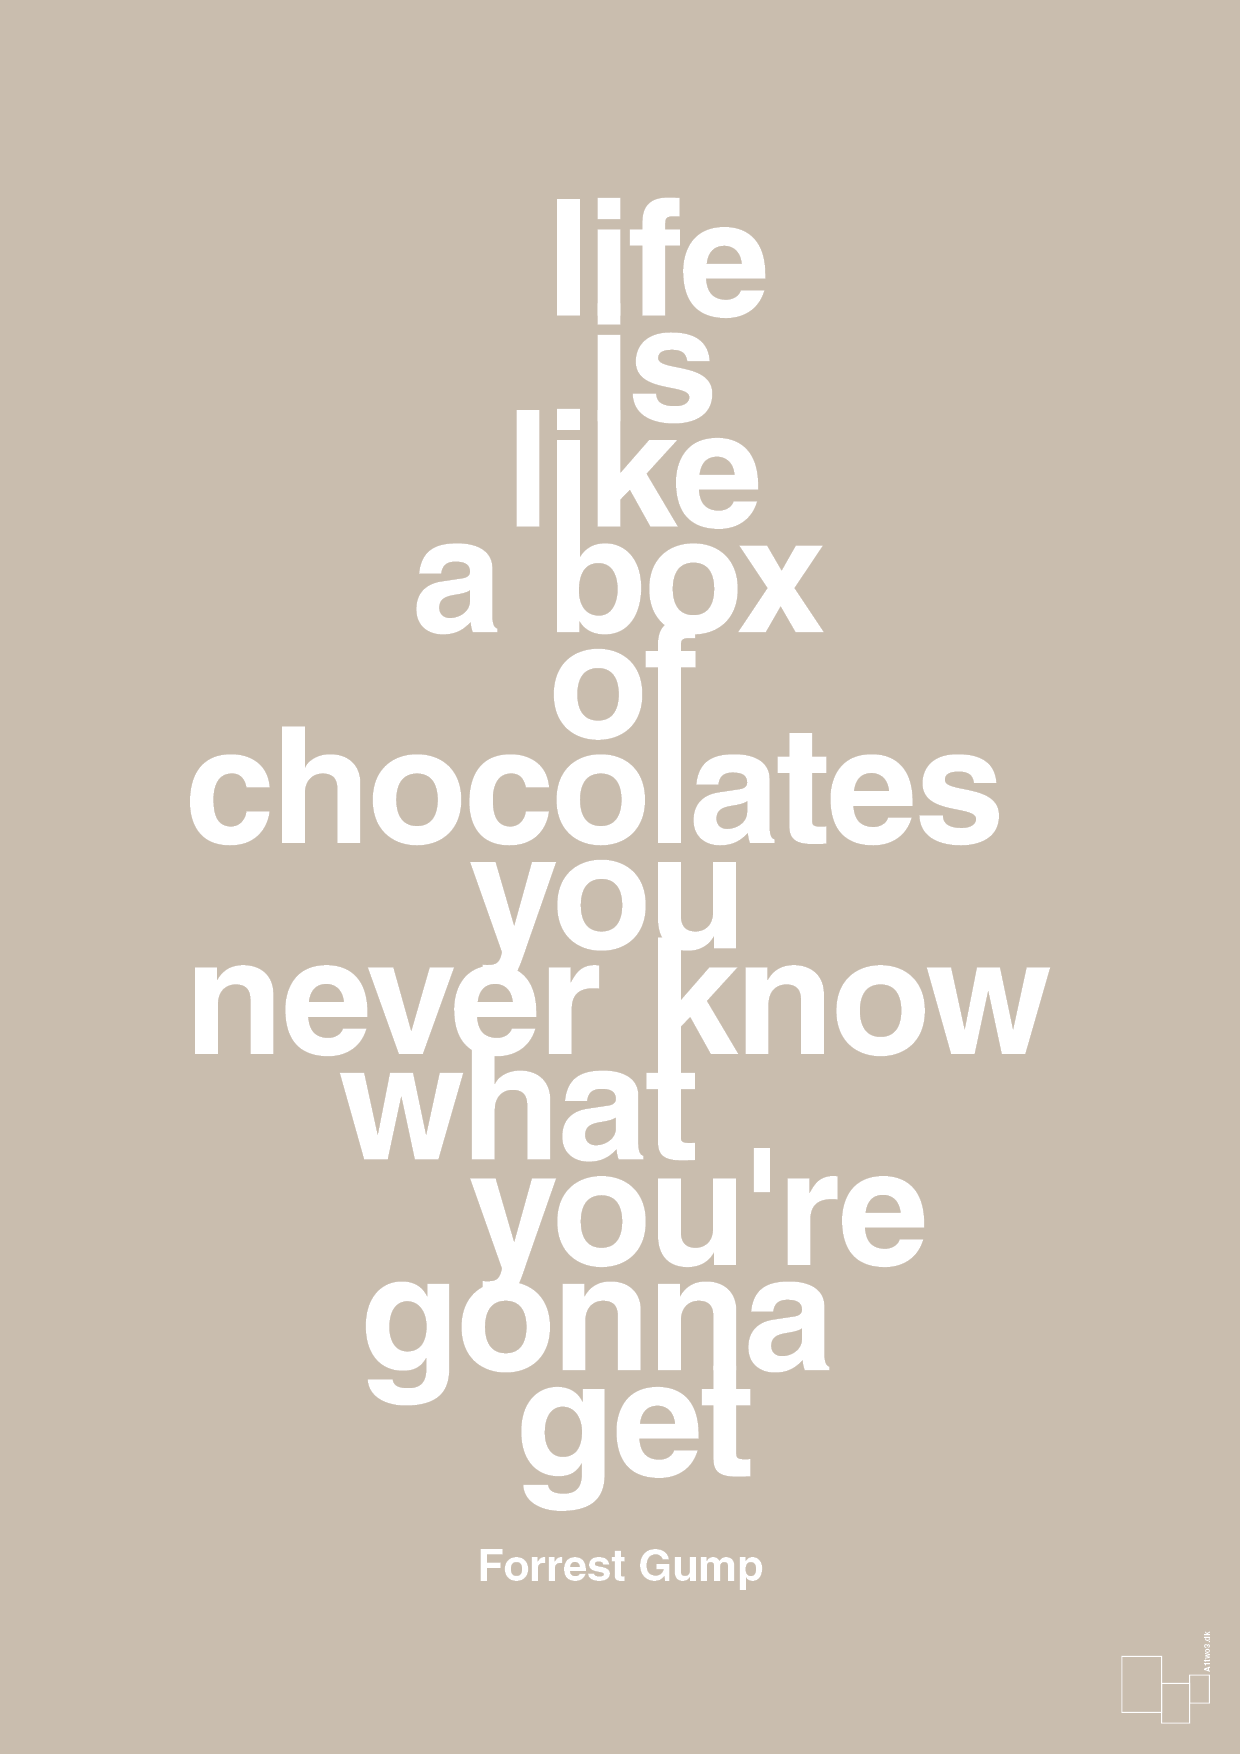 life is like a box of chocolates you never know what you're gonna get - Plakat med Citater i Creamy Mushroom